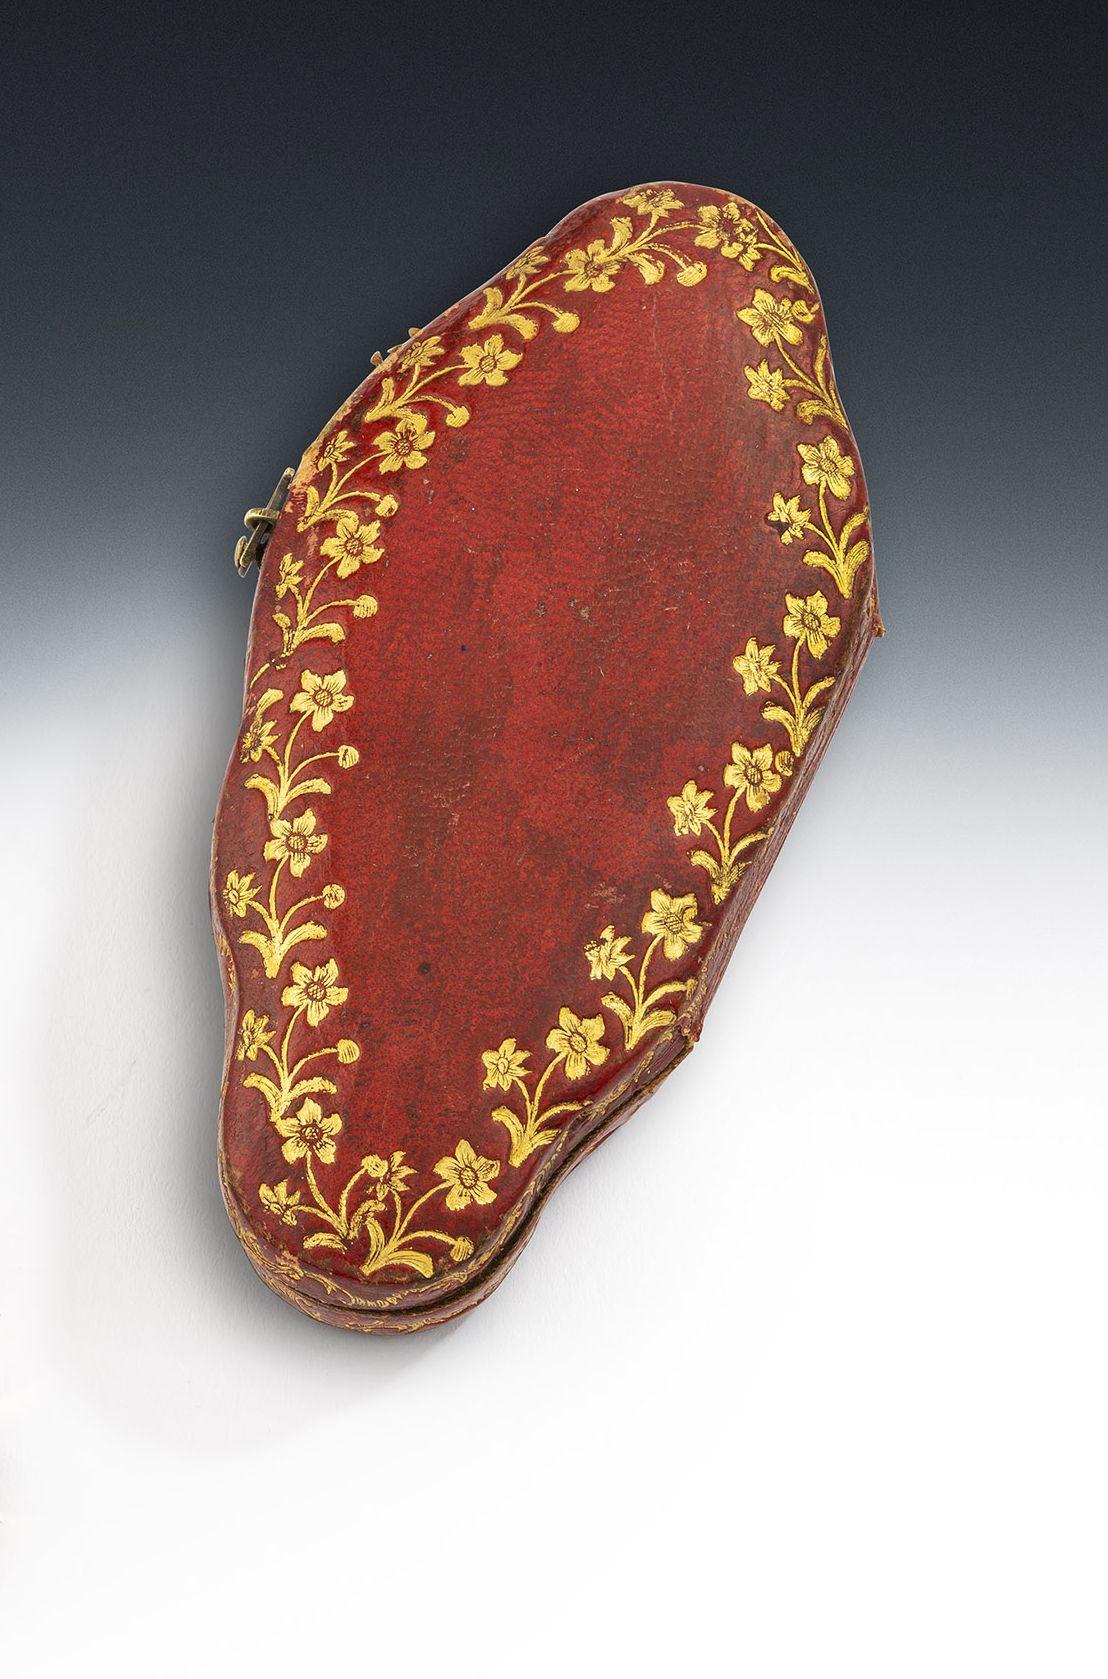 English George III Gold & Enamel Magnifying Glass with Red Leather Case, circa 1770 For Sale